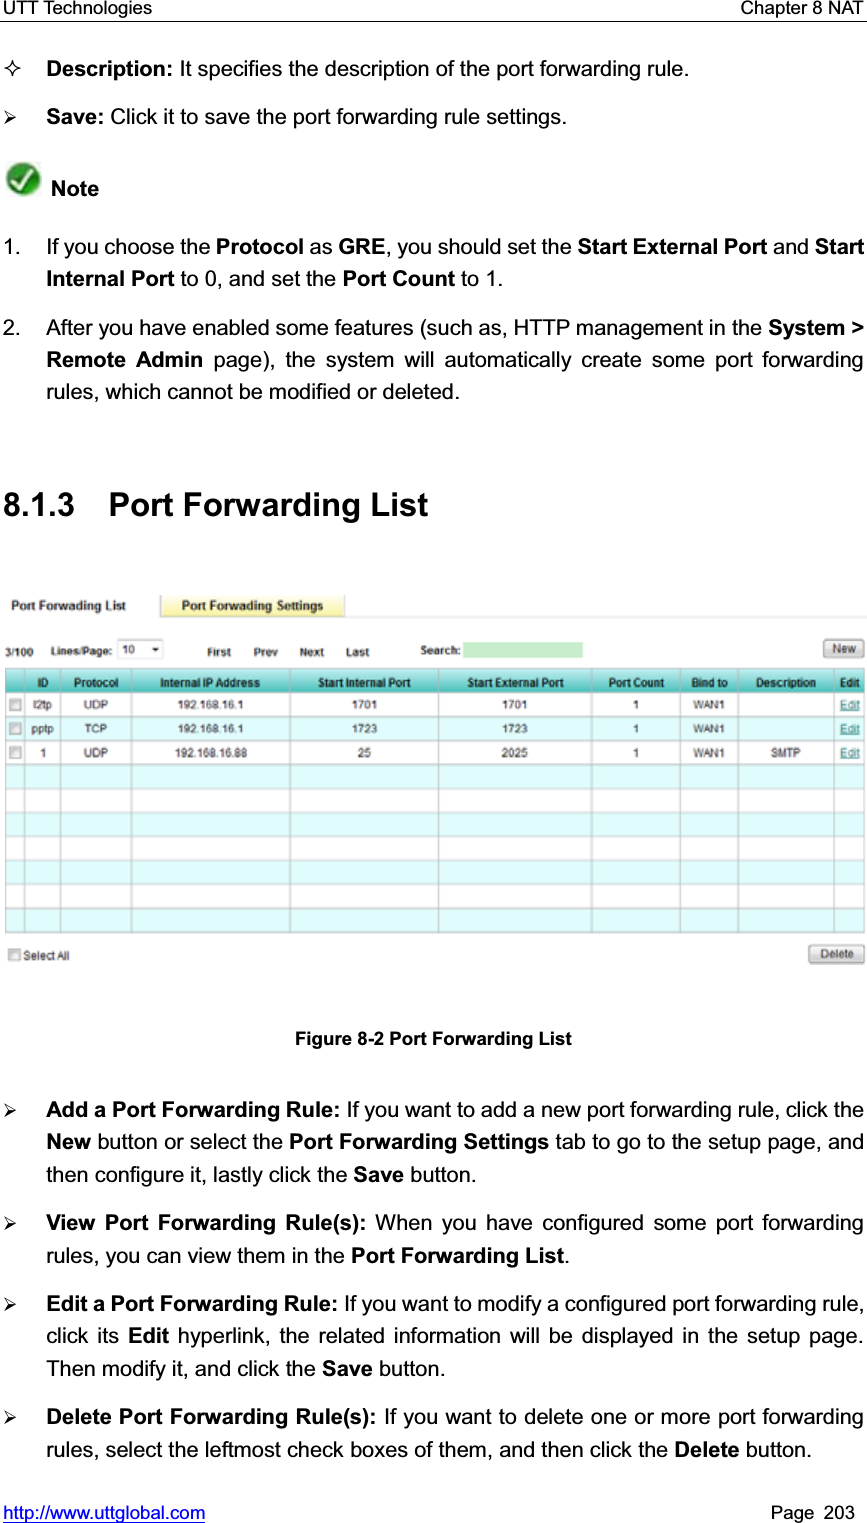 UTT Technologies    Chapter 8 NAT   http://www.uttglobal.com Page 203 Description: It specifies the description of the port forwarding rule. ¾Save: Click it to save the port forwarding rule settings.Note1. If you choose the Protocol as GRE, you should set the Start External Port and Start Internal Port to 0, and set the Port Count to 1.   2.  After you have enabled some features (such as, HTTP management in the System &gt; Remote Admin page), the system will automatically create some port forwarding rules, which cannot be modified or deleted. 8.1.3  Port Forwarding List Figure 8-2 Port Forwarding List ¾Add a Port Forwarding Rule: If you want to add a new port forwarding rule, click theNew button or select the Port Forwarding Settings tab to go to the setup page, and then configure it, lastly click the Save button. ¾View Port Forwarding Rule(s): When you have configured some port forwarding rules, you can view them in the Port Forwarding List.¾Edit a Port Forwarding Rule: If you want to modify a configured port forwarding rule, click its Edit hyperlink, the related information will be displayed in the setup page. Then modify it, and click the Save button. ¾Delete Port Forwarding Rule(s): If you want to delete one or more port forwarding rules, select the leftmost check boxes of them, and then click the Delete button. 